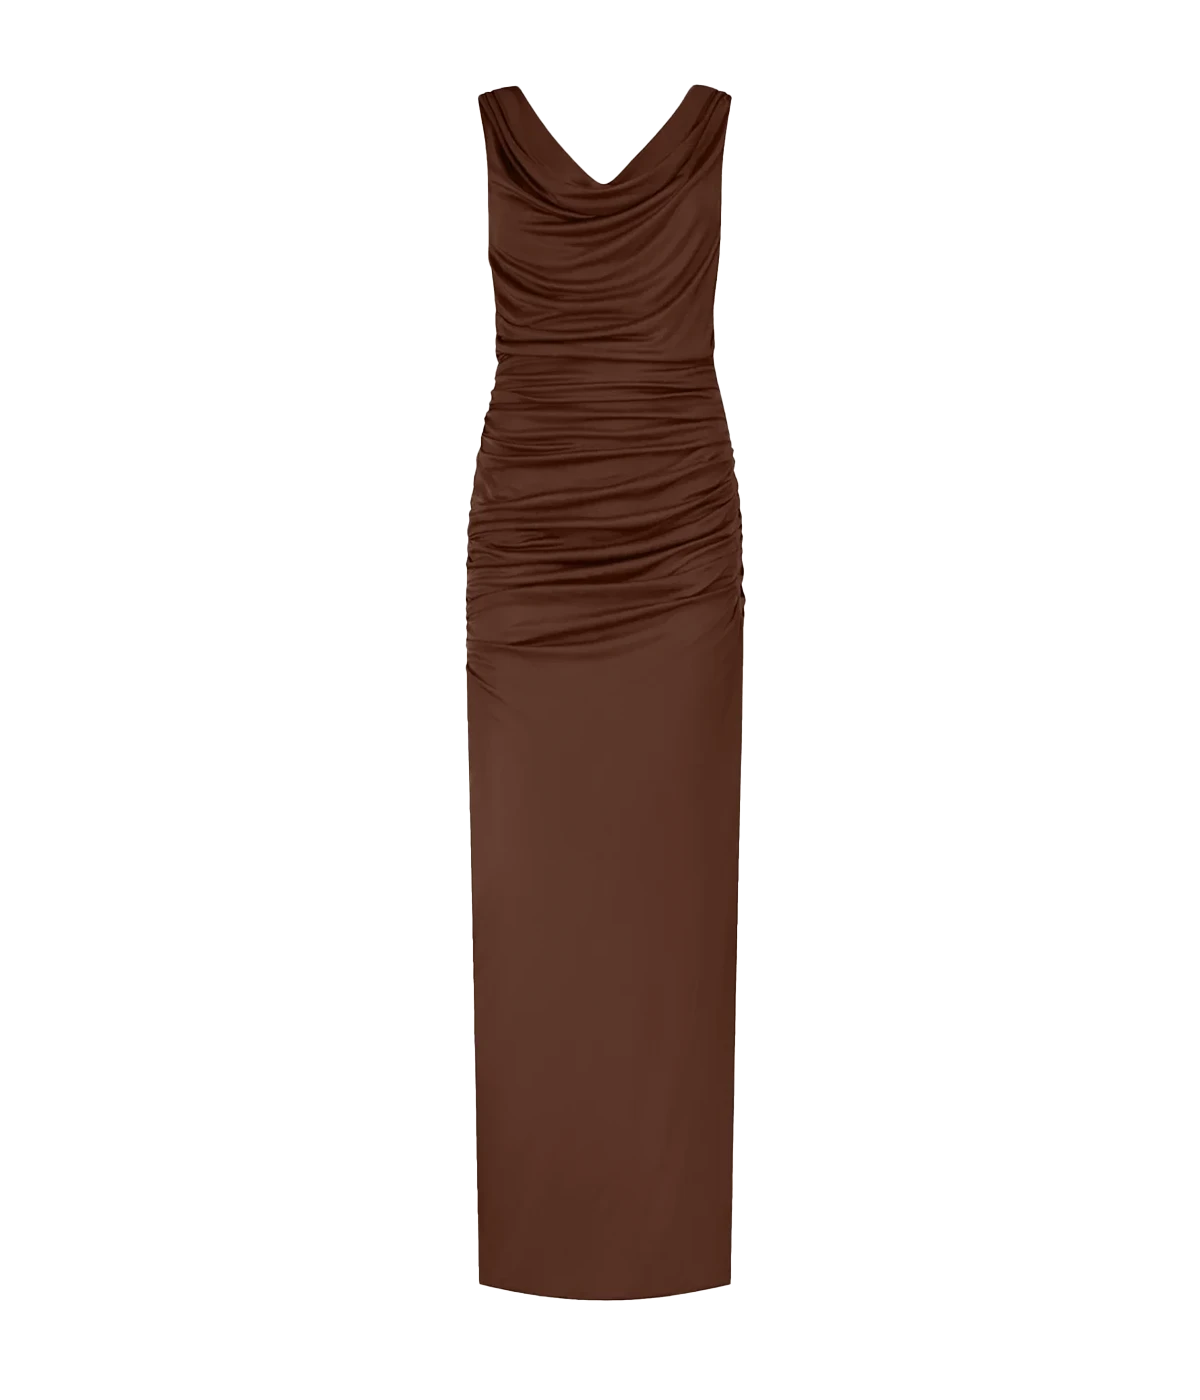 A sexy elegant silky evening dress, in a chocolate colourway, featuring waterfall drapes, open back, low ruched back, zip closure and cowl neck. Date night dress, max length, sleeveless, made in Amsterdam, party dress, birthday dress. 